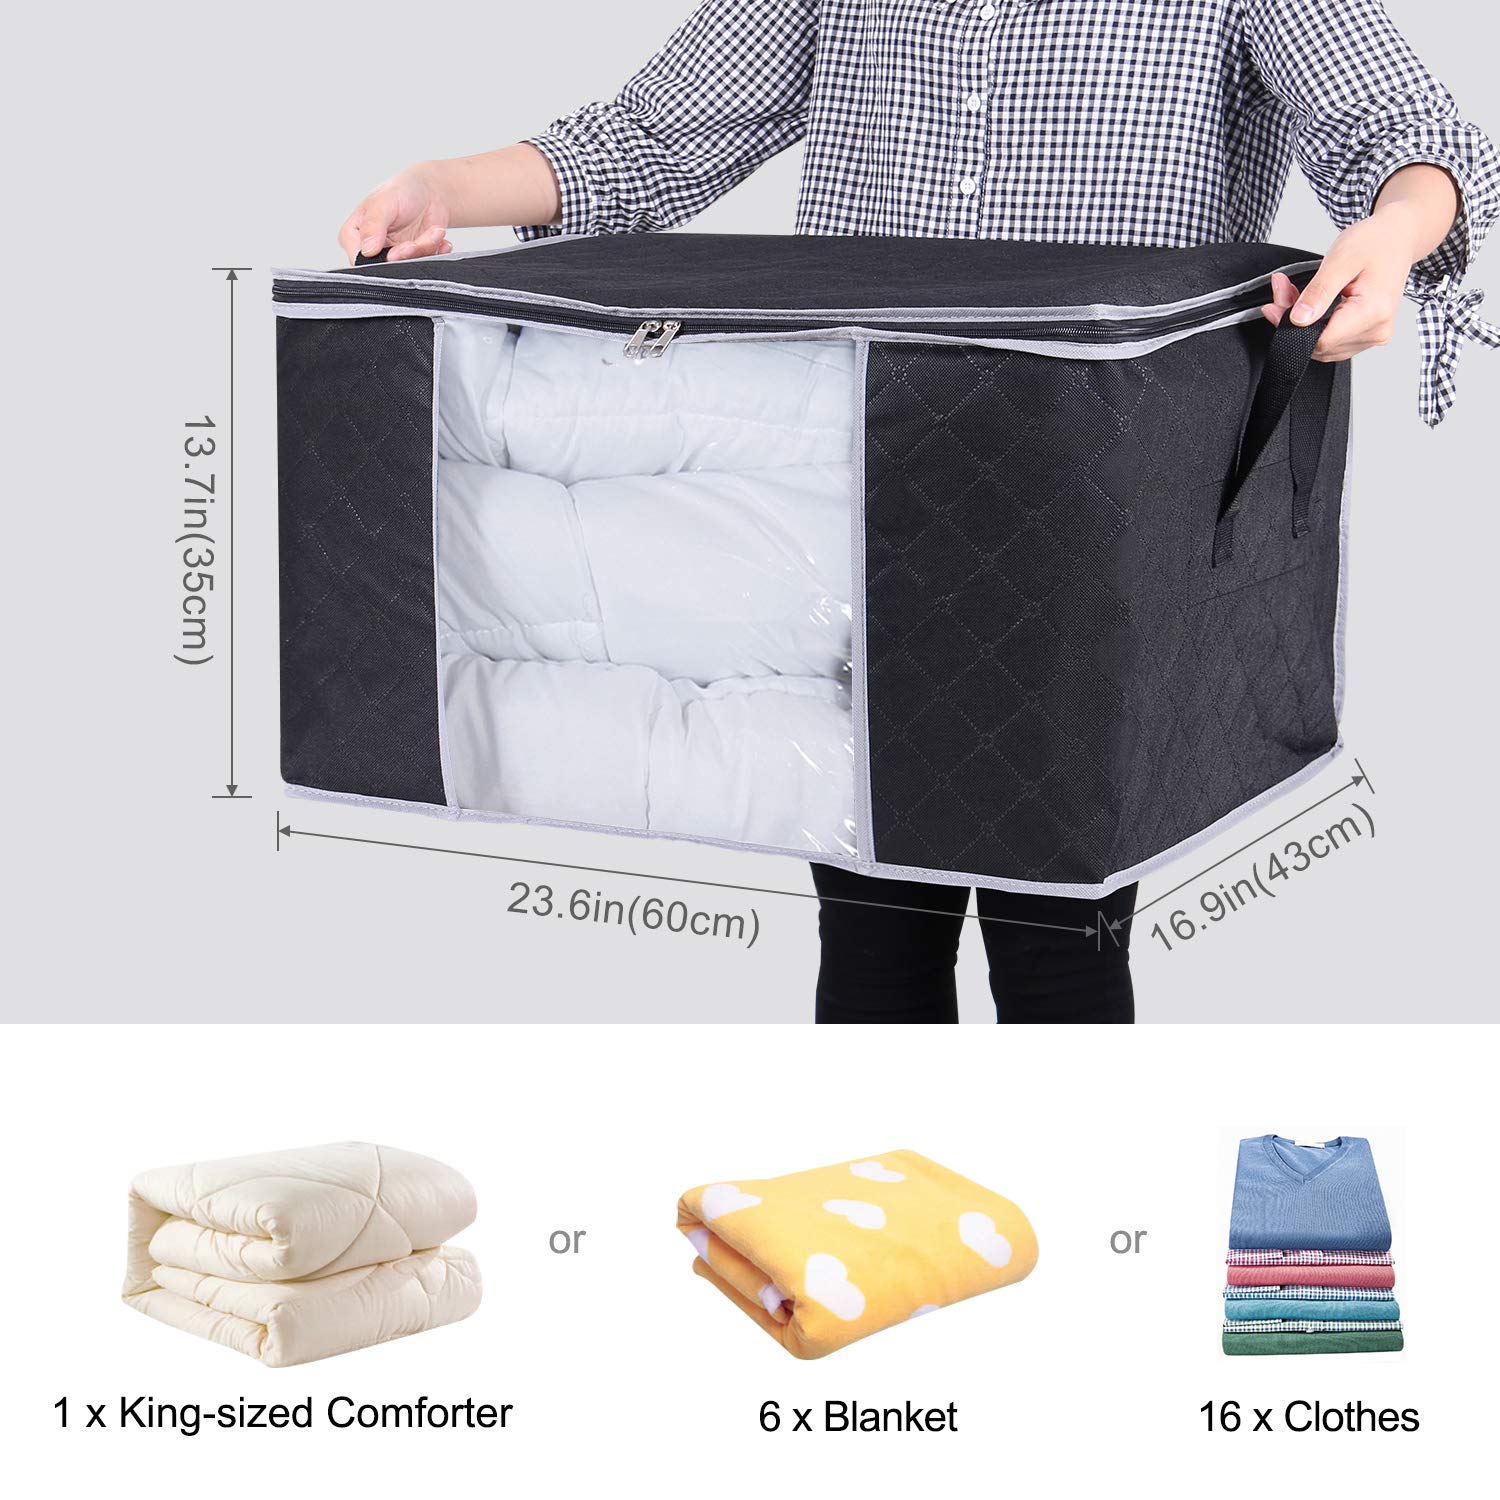 Lifewit Large Capacity Clothes Storage Bag Organizer with Reinforced Handle  Thick Fabric for Comforters, Blankets, Bedding, Foldable with Sturdy